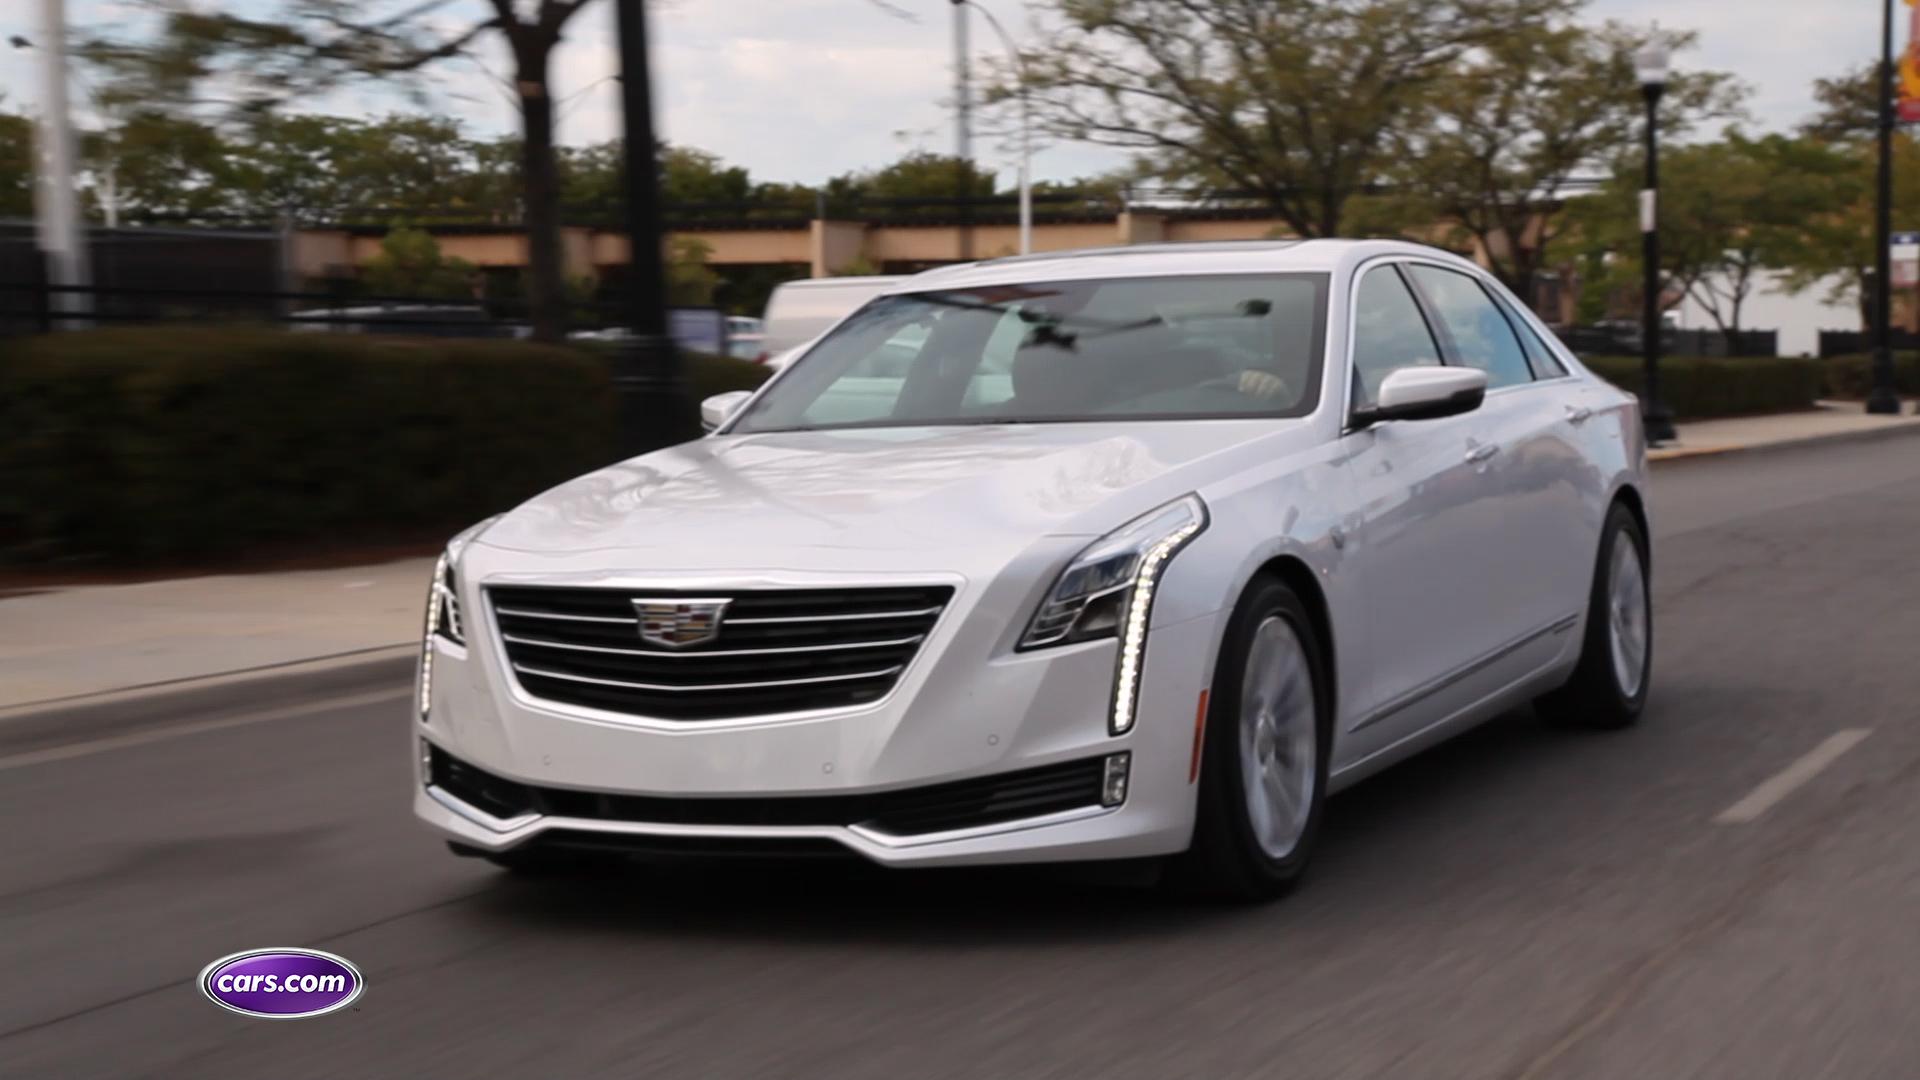 2017 Cadillac CT6 PLUG-IN Expert Reviews, Specs and Photos | Cars.com